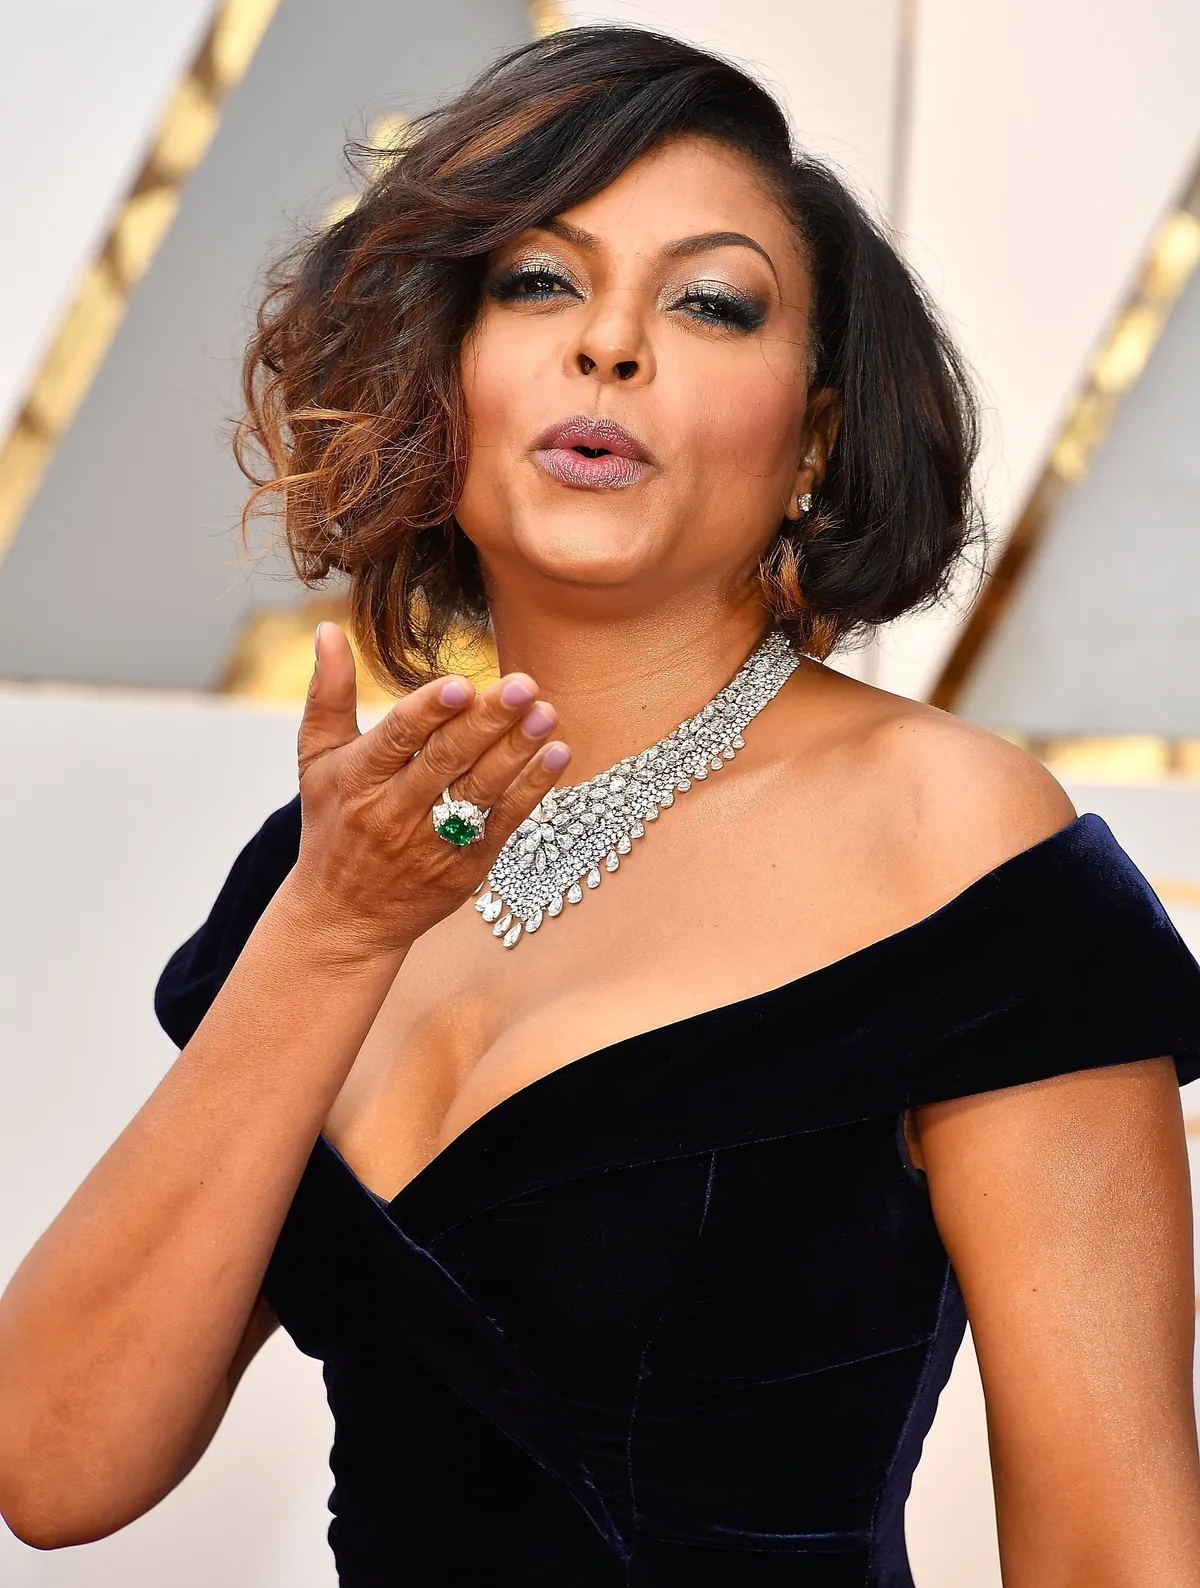 Taraji P. Henson attends the 89th Annual Academy Awards at Hollywood & Highland Center on February 26, 2017. | Photo: Getty Images